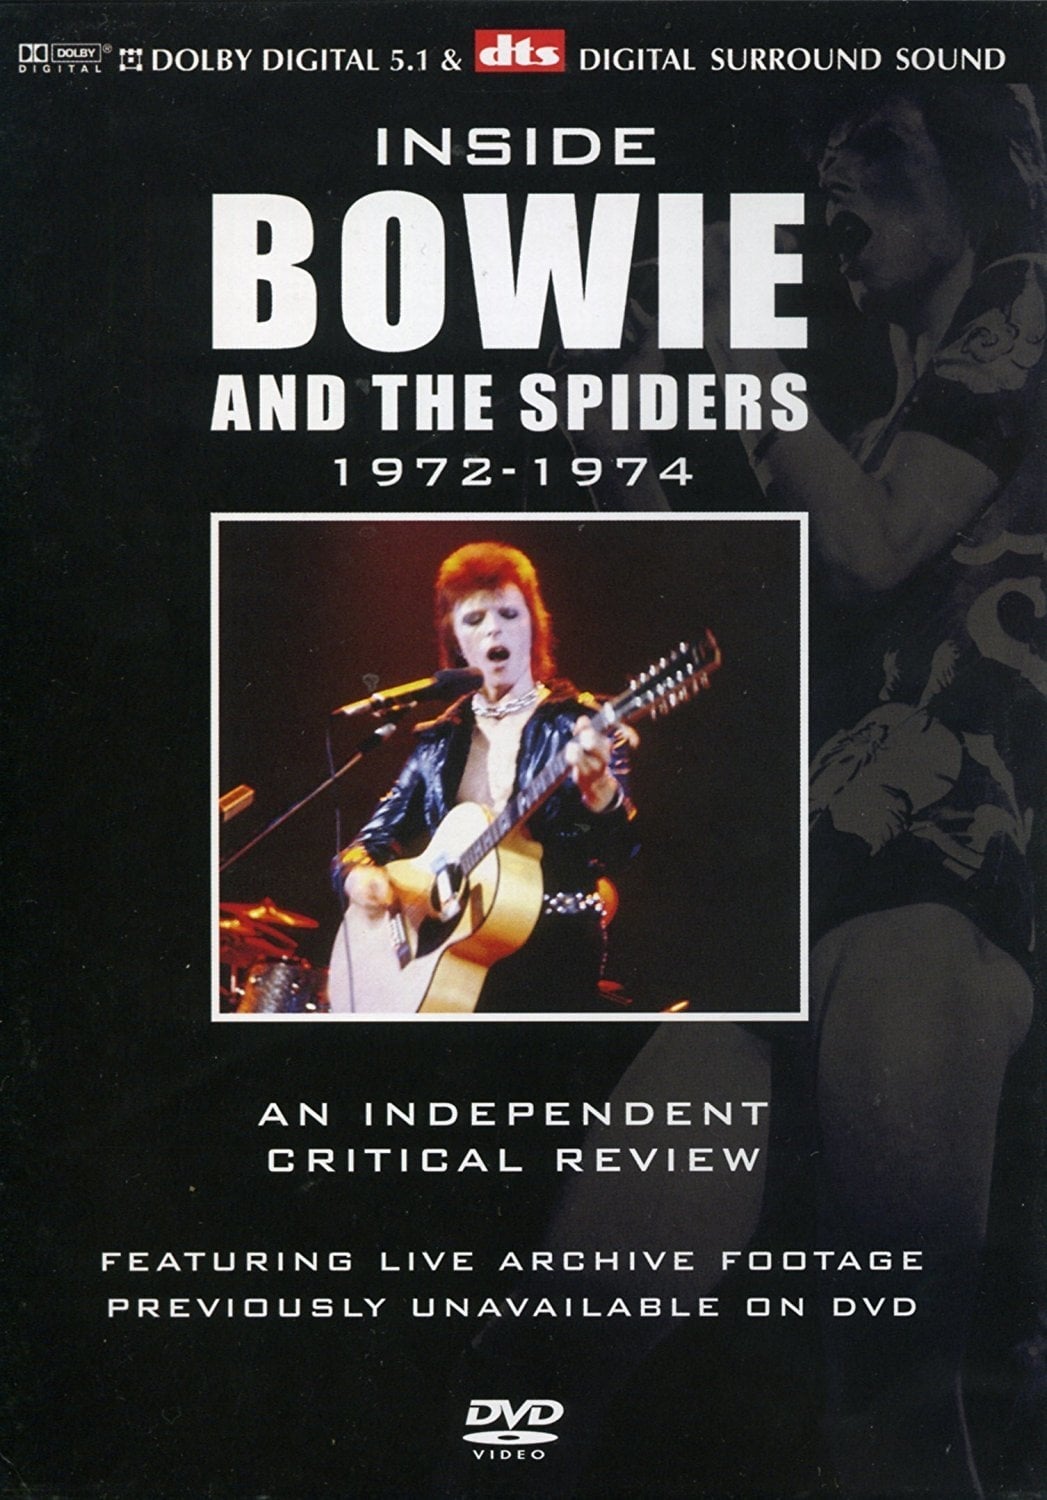 David Bowie: Inside Bowie and the Spiders: 1972-1974